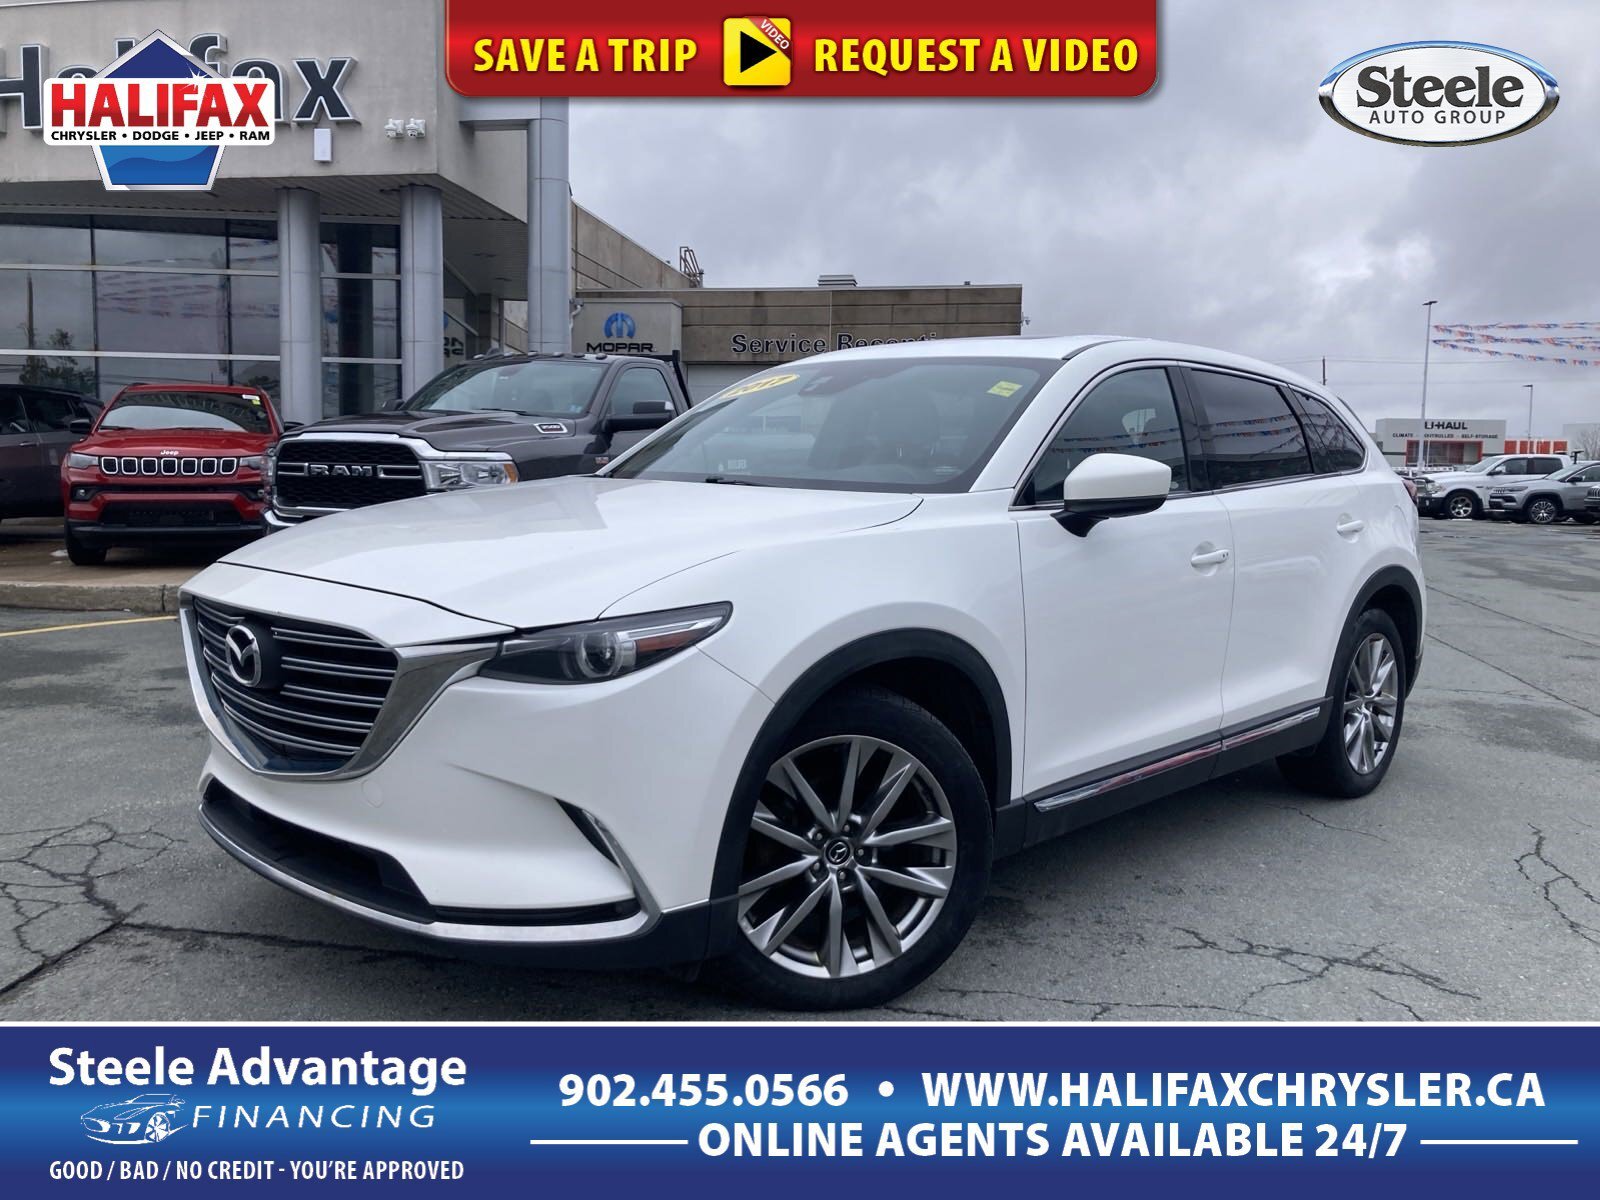 2017 Mazda CX-9 GT - 7 PASSANGER, HEATED LEATHER SEATS AND WHEEL, 